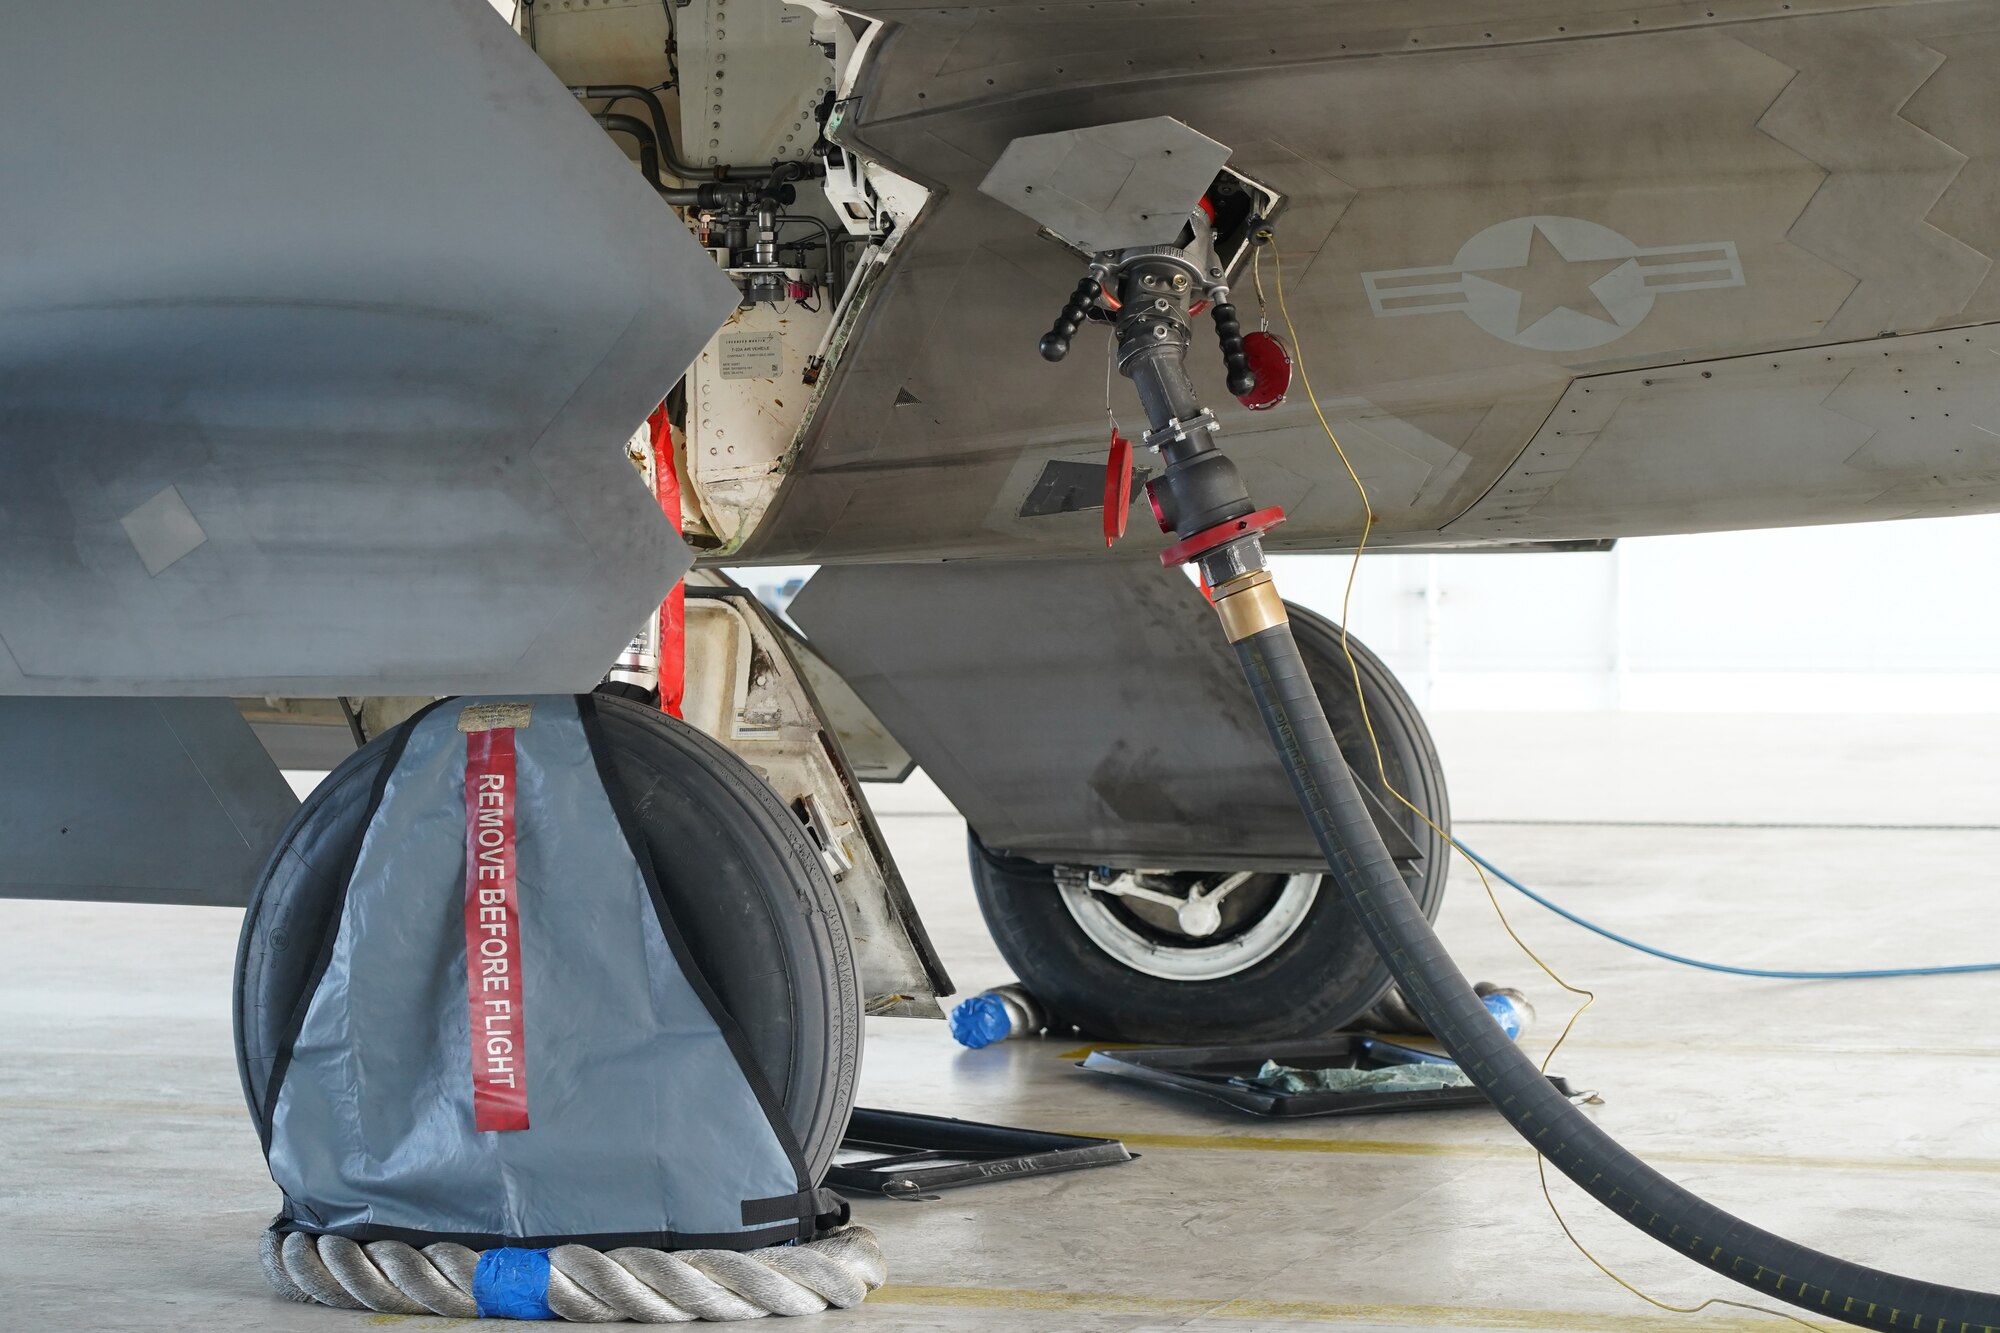 An F-22 Raptor is refueled by Airmen assigned to the 673d Logistics Readiness Squadron on Joint Base Elmendorf-Richardson, Alaska, Aug. 9, 2019.  Fuels specialists manage every aspect of the refueling every aircraft on the flight line and are responsible for operating the vehicles, equipment and storage facilities that are essential to refueling operations while ensuring compliance with all safety regulations while handling these volatile liquids.